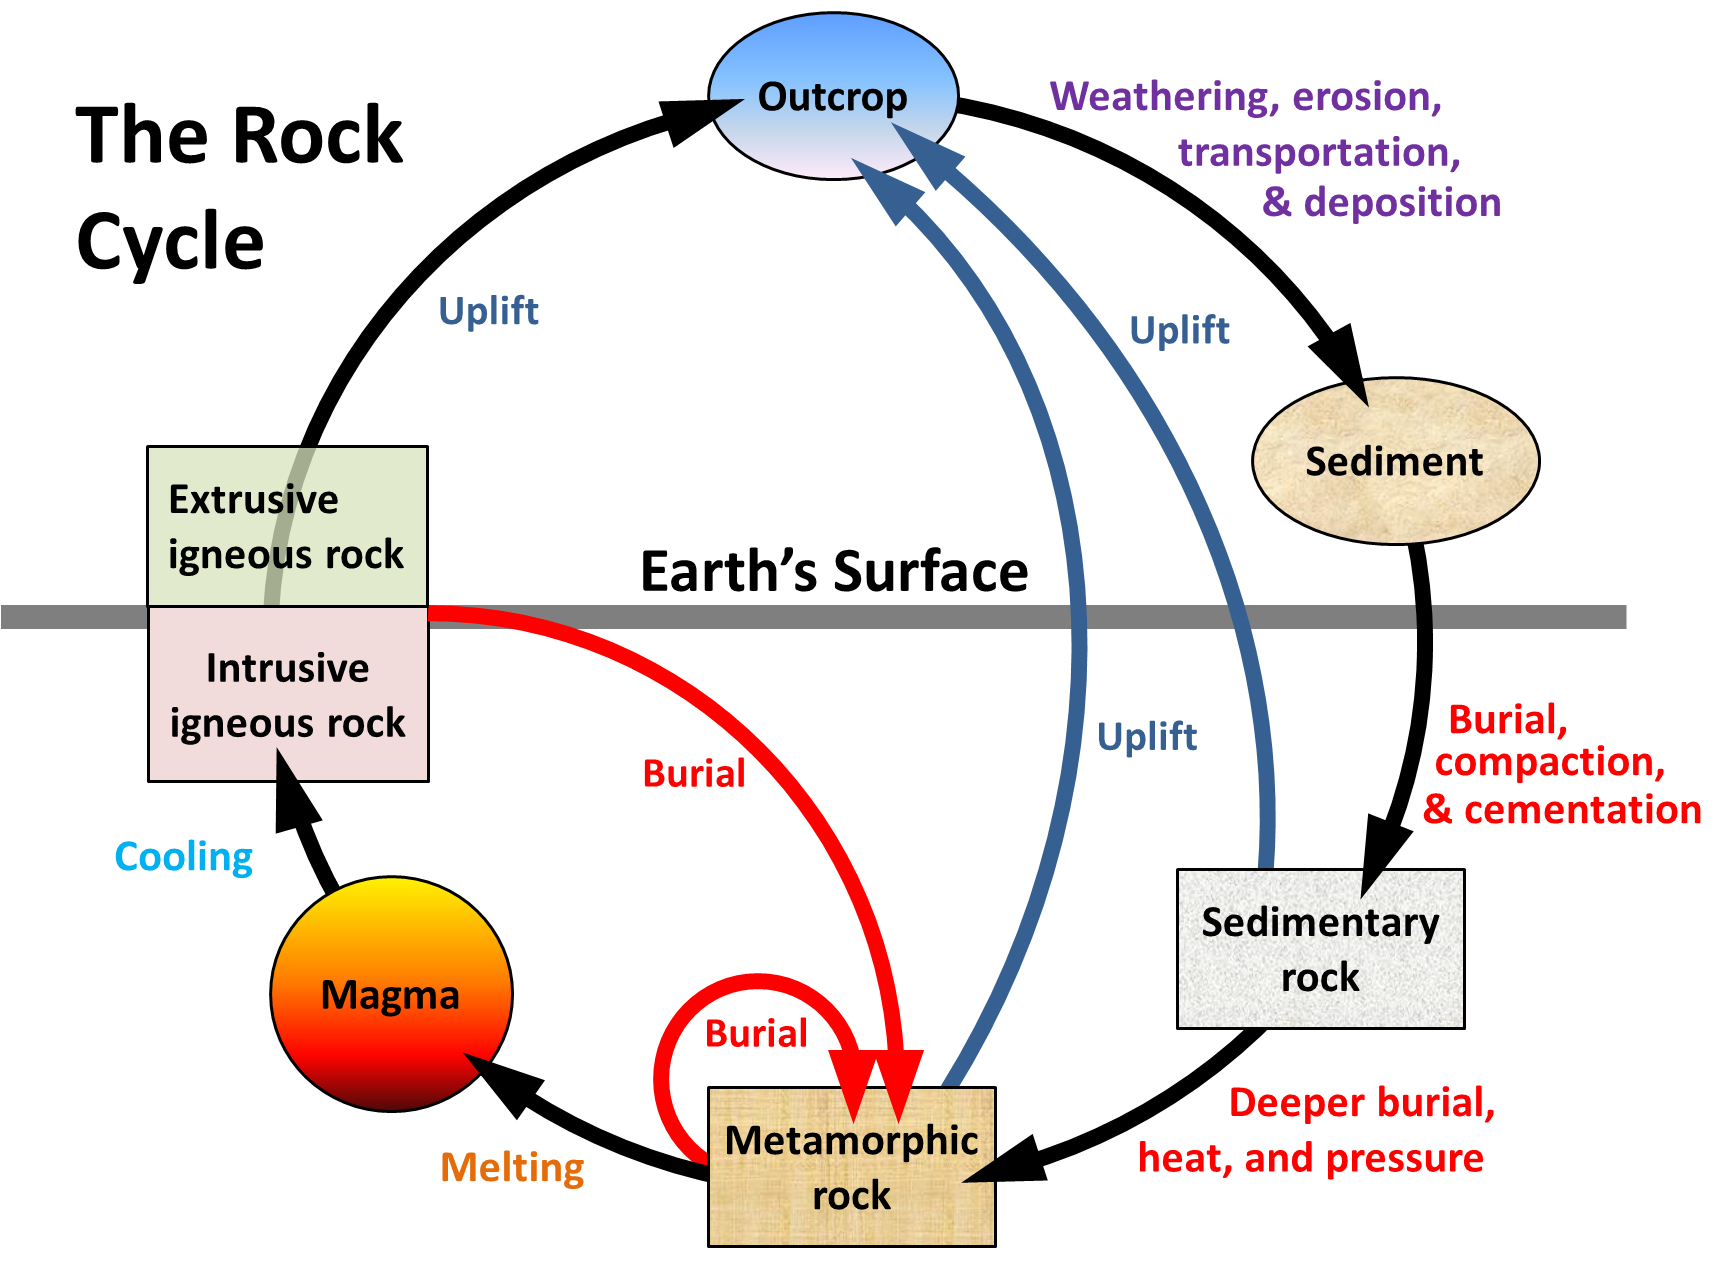 Figure 7.2 The rock cycle. The processes related to metamorphic rocks are at the bottom of the cycle. [SE ]